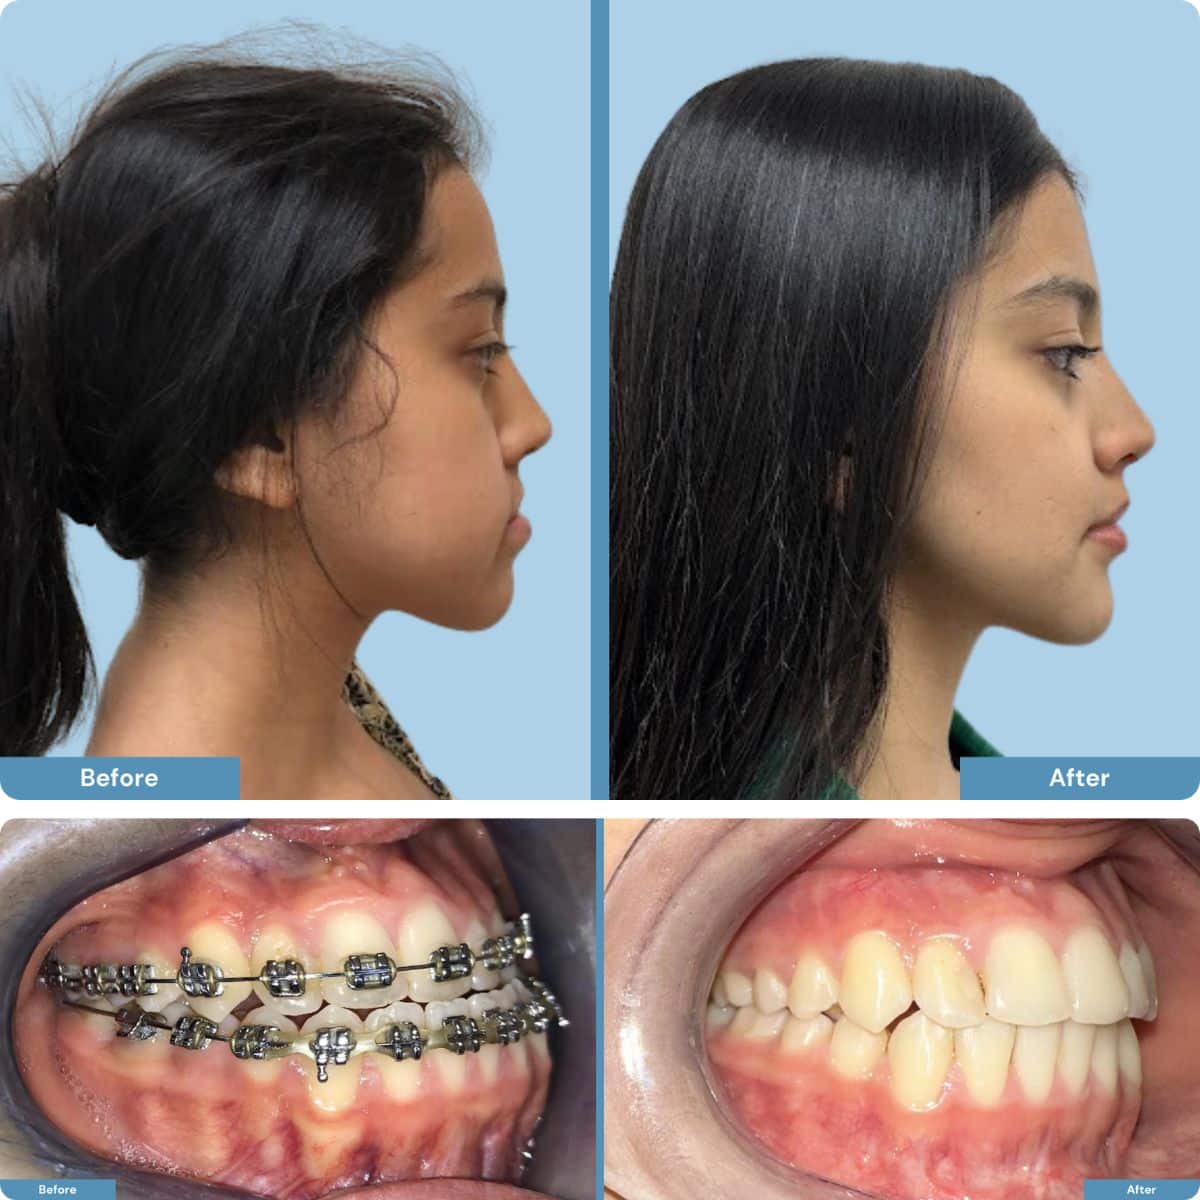 Before and after orthognathic jaw surgery with braces